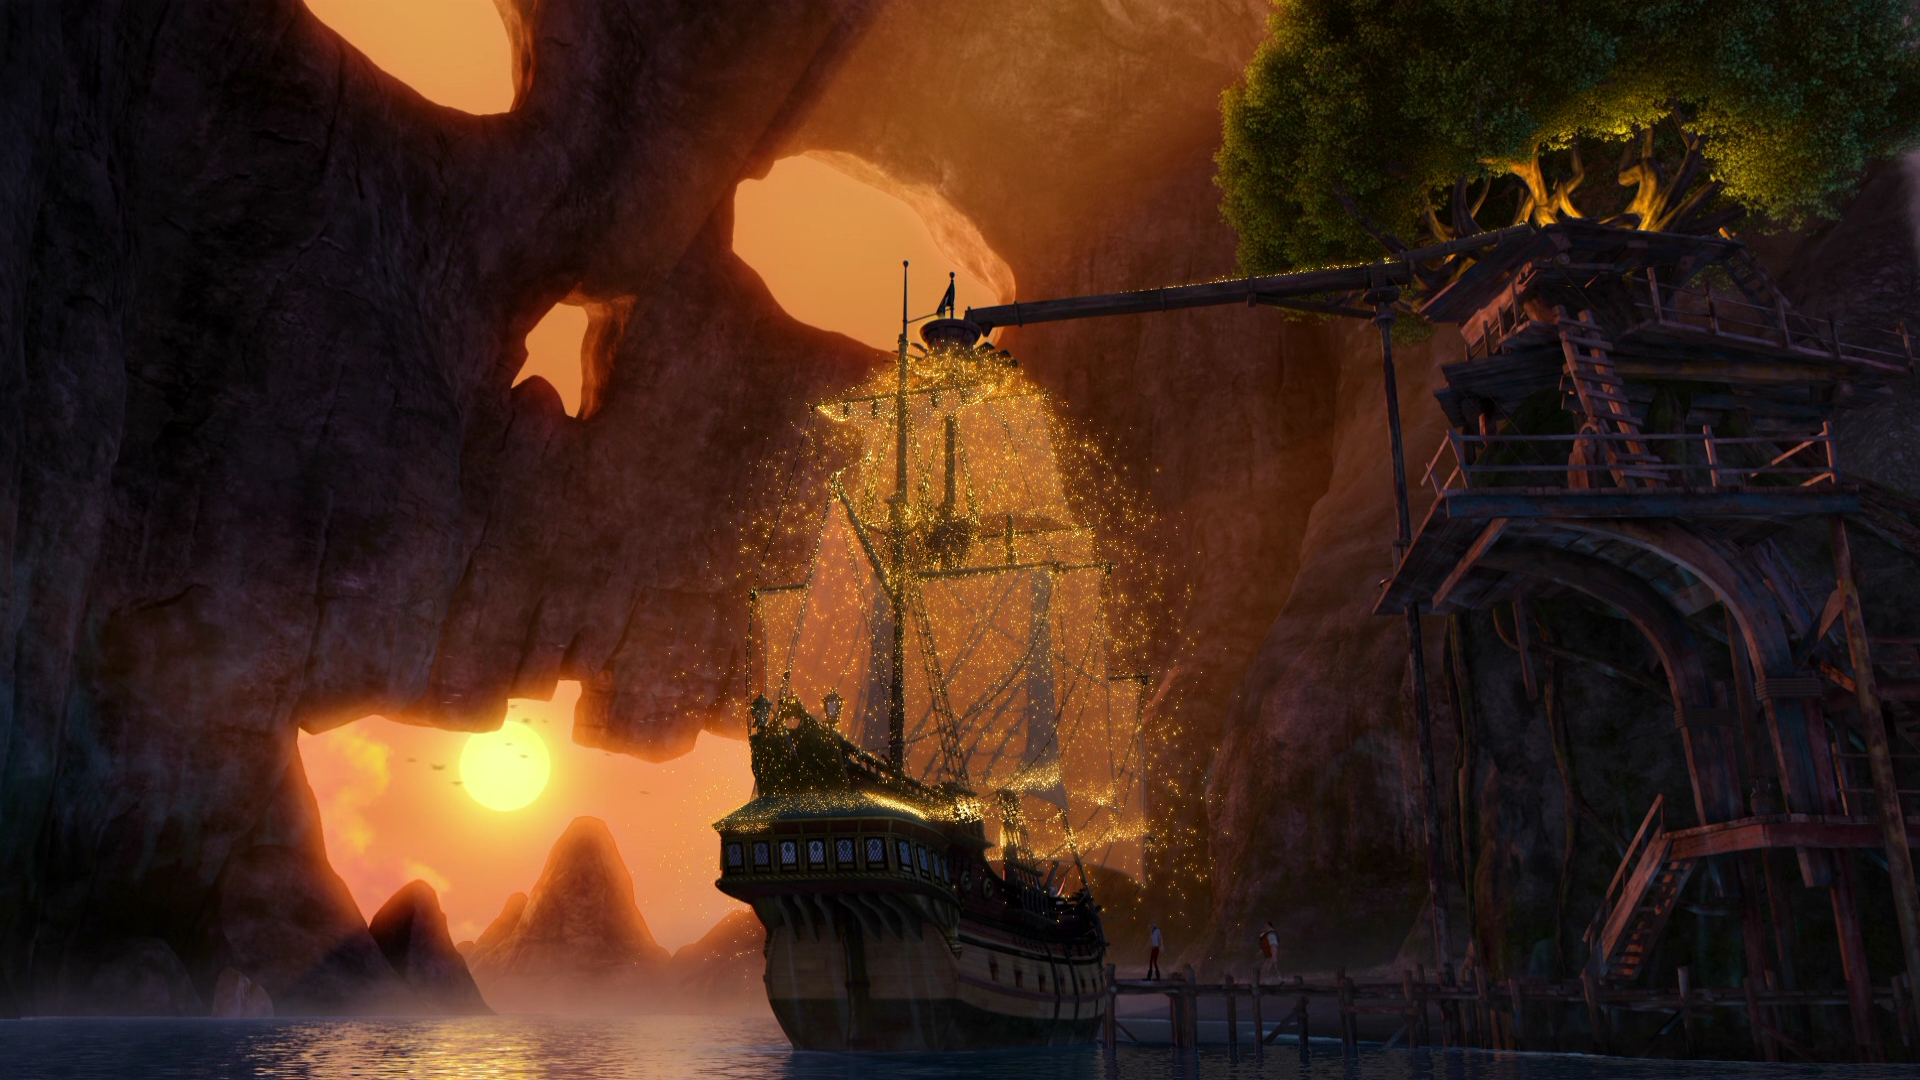 Movie The Pirate Fairy HD Wallpaper | Background Image